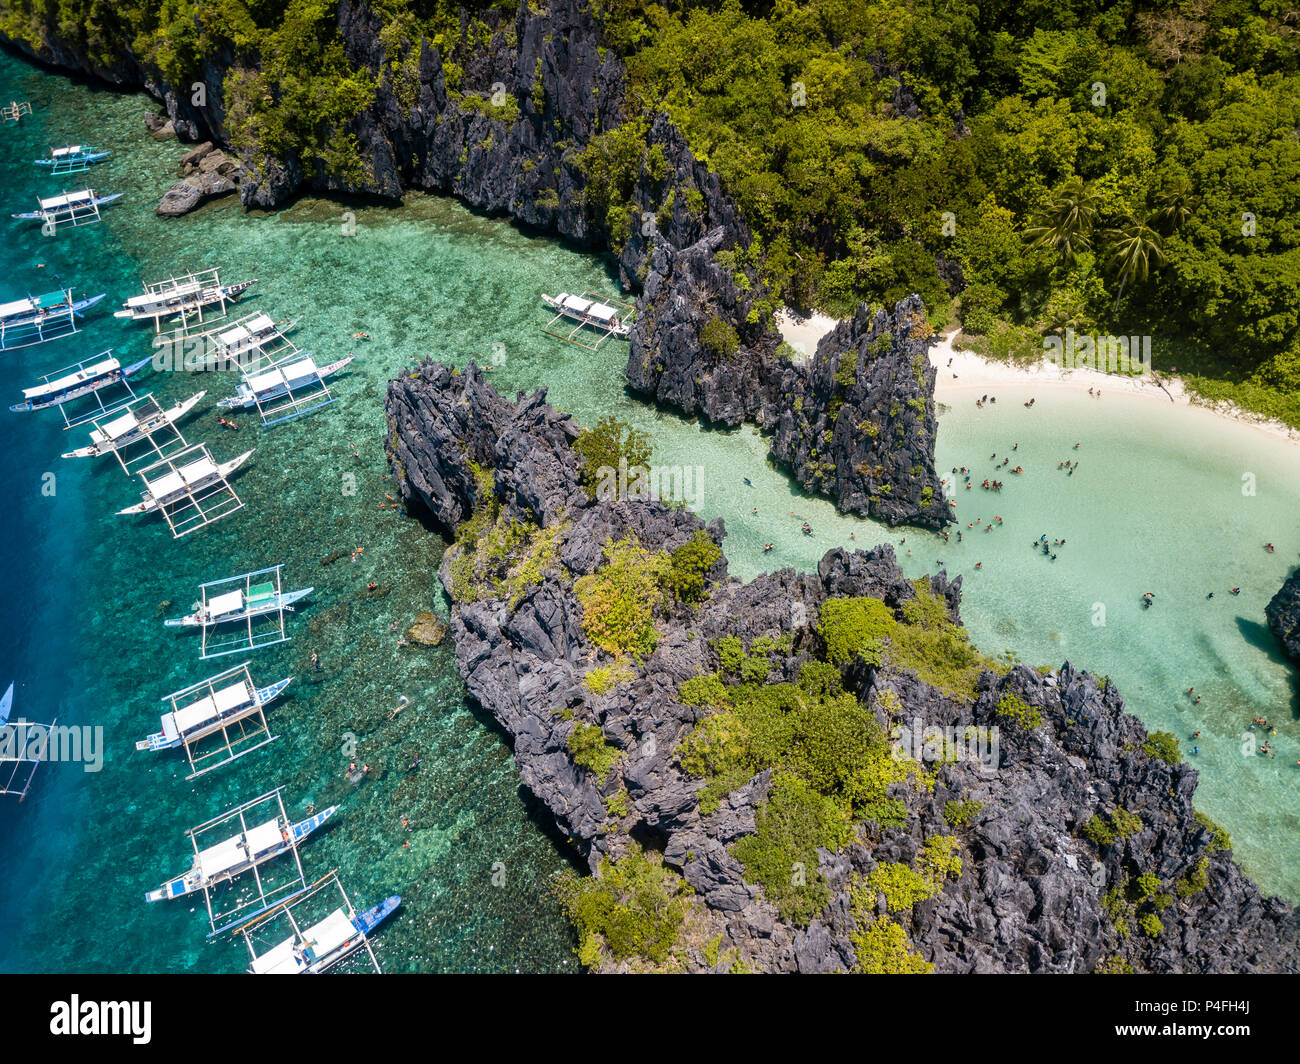 Aerial drone view of banca boats over a beautiful shallow tropical lagoon with sandy beach Stock Photo